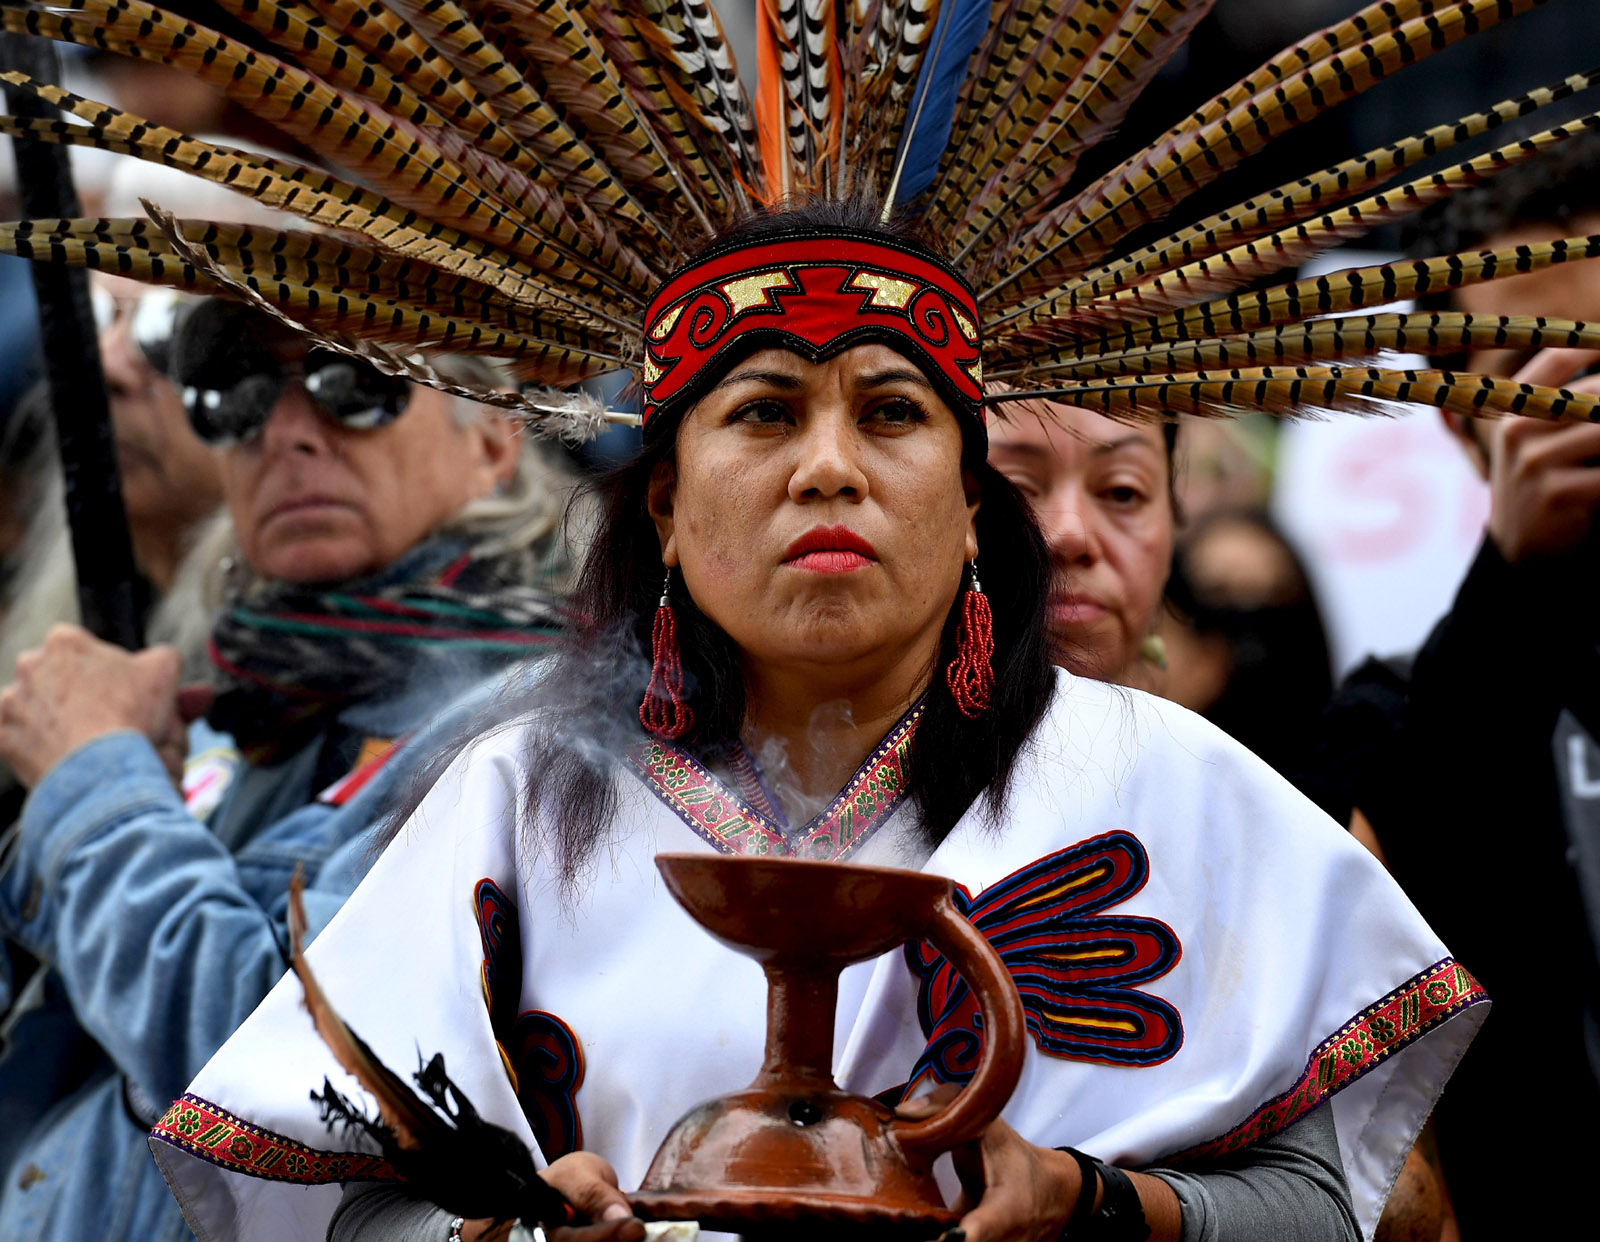 An indigenous woman leading protesters against President Trump’s executive order fast-tracking the Keystone XL and Dakota Access oil pipelines